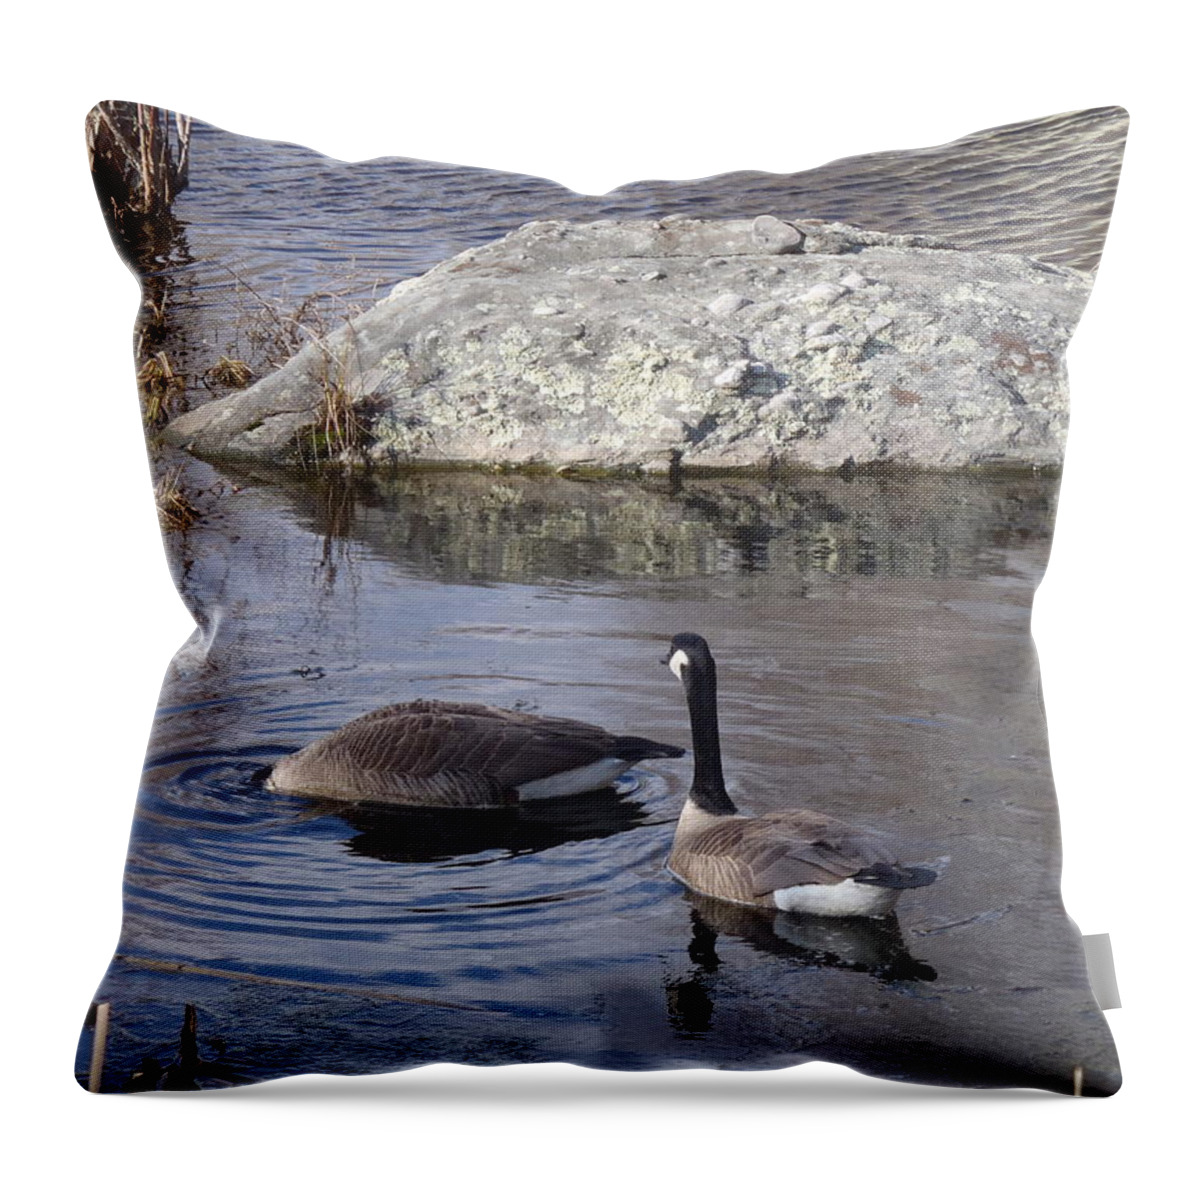 Geese Throw Pillow featuring the photograph Pond Diving by Robert Nickologianis